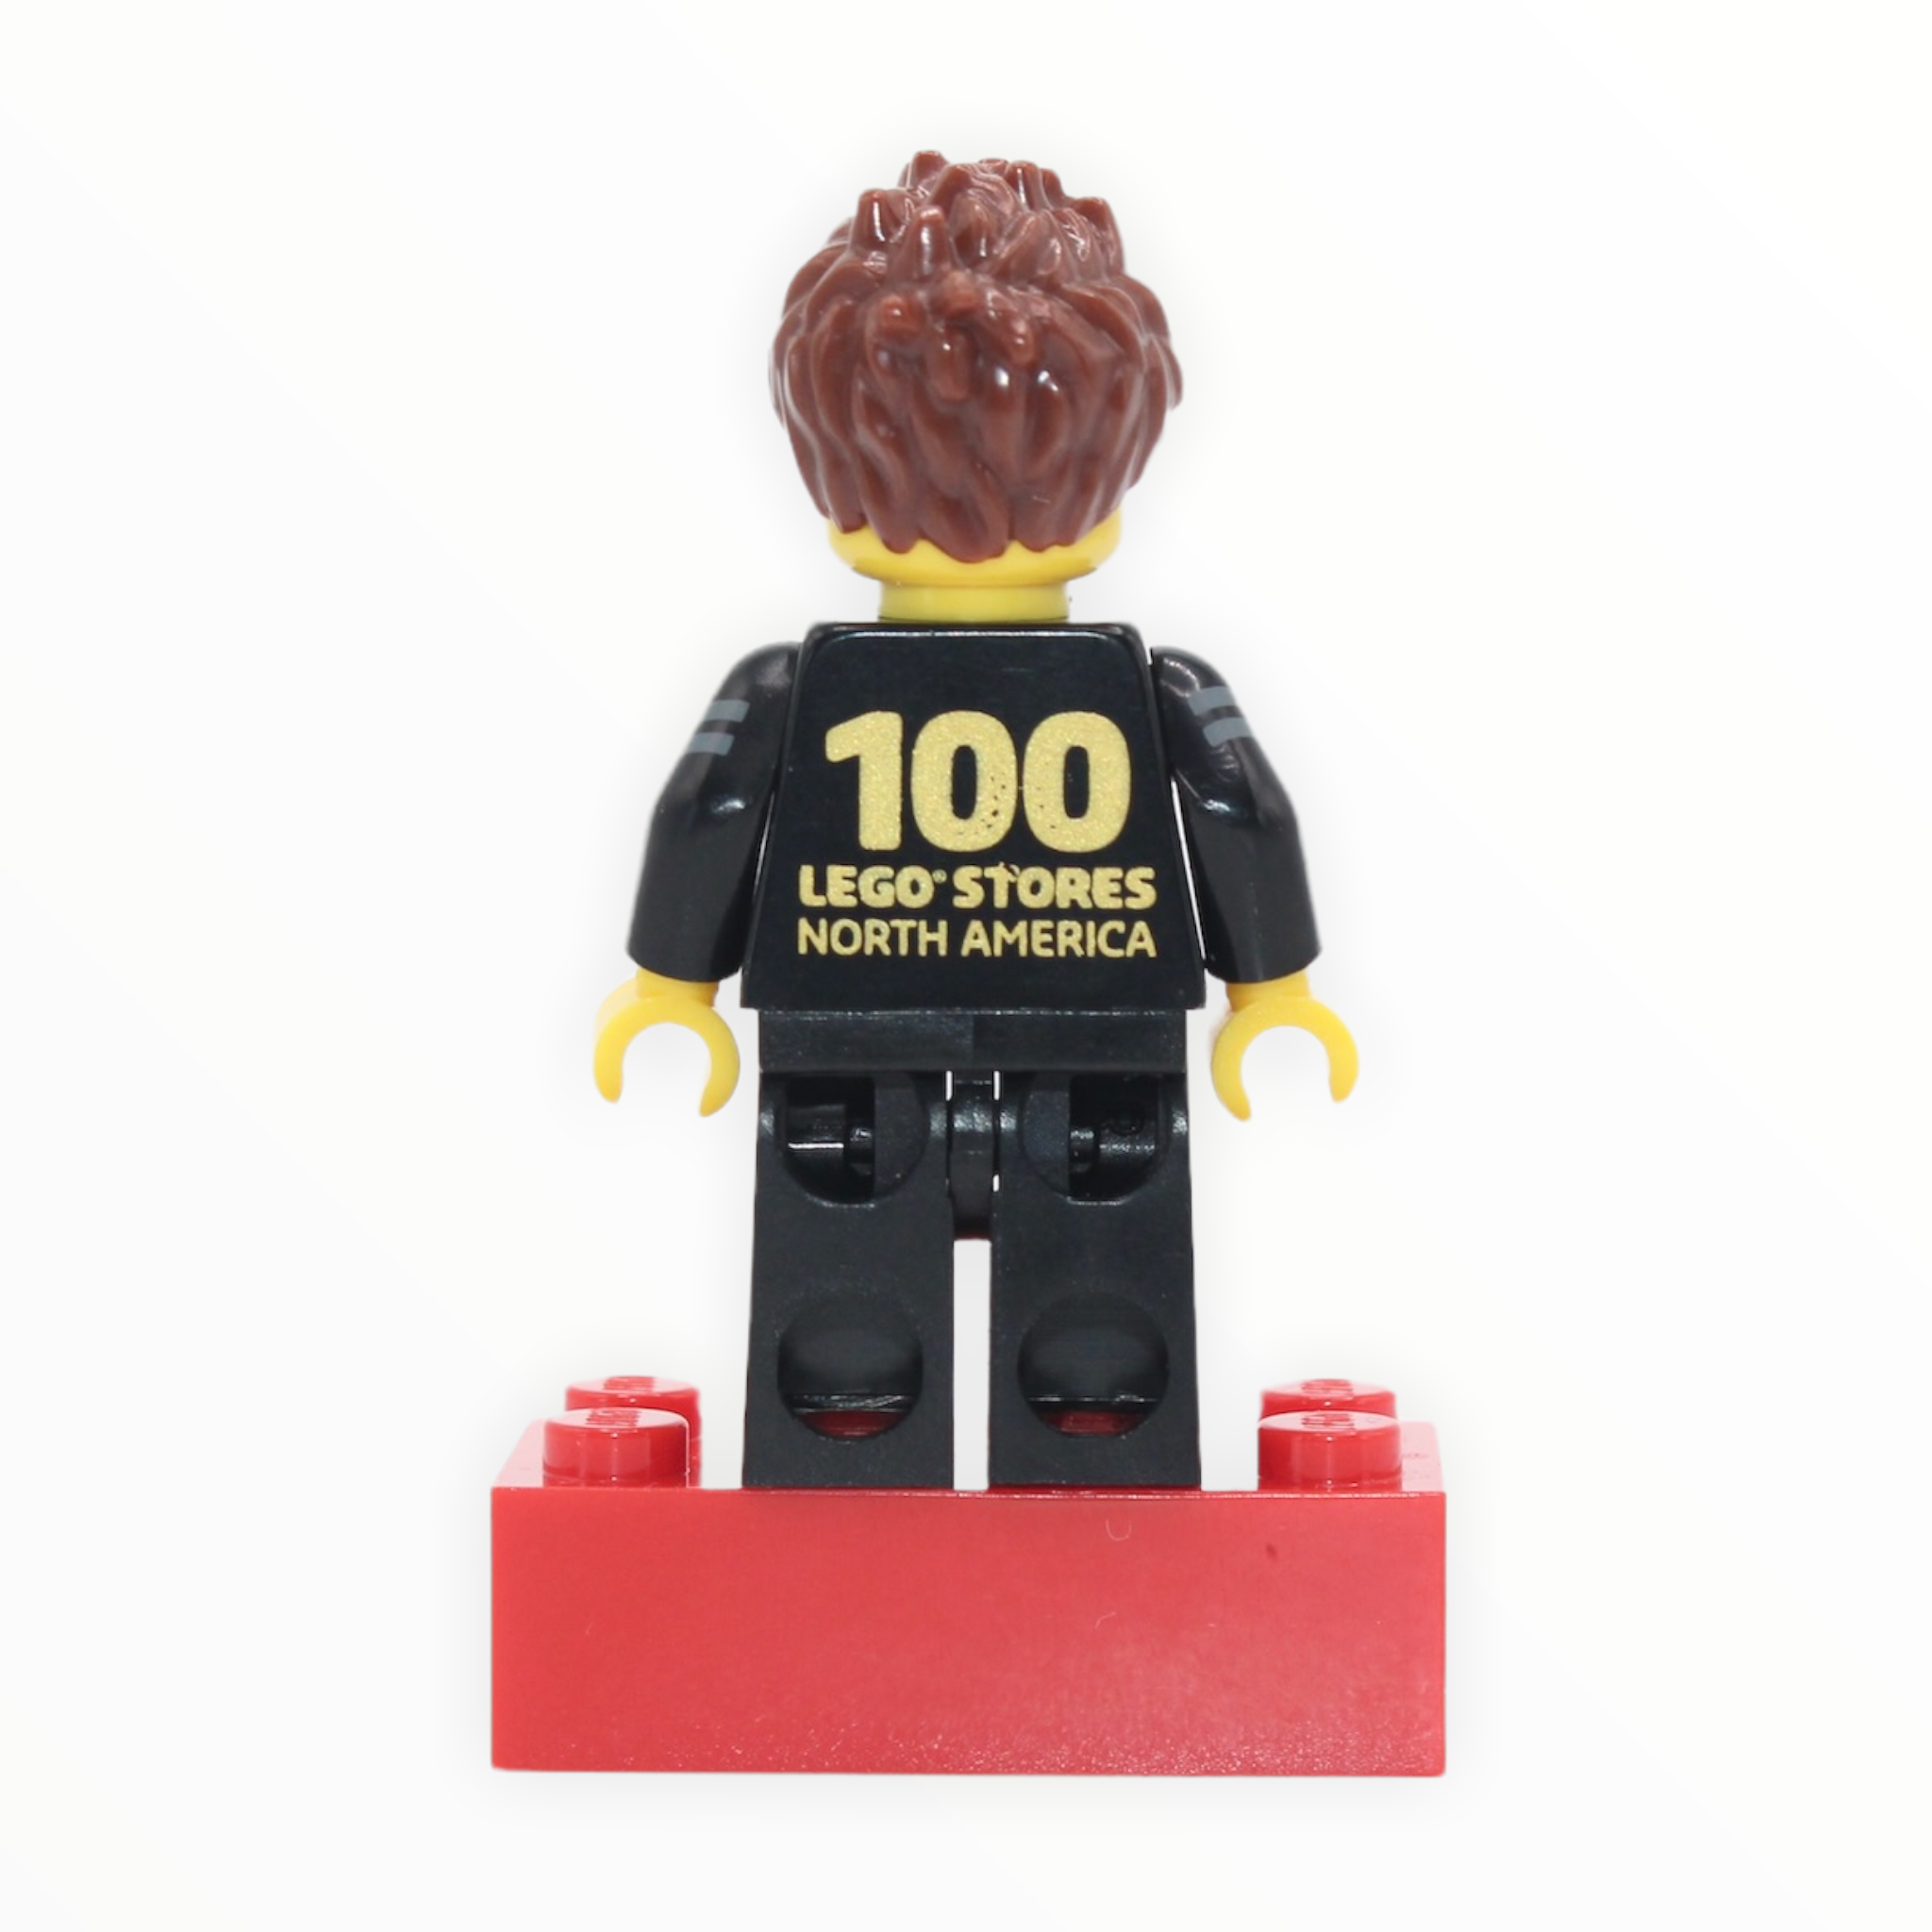 LEGO Brand Store Employee with 100 LEGO Stores Brick (100 Stores back printing on torso)